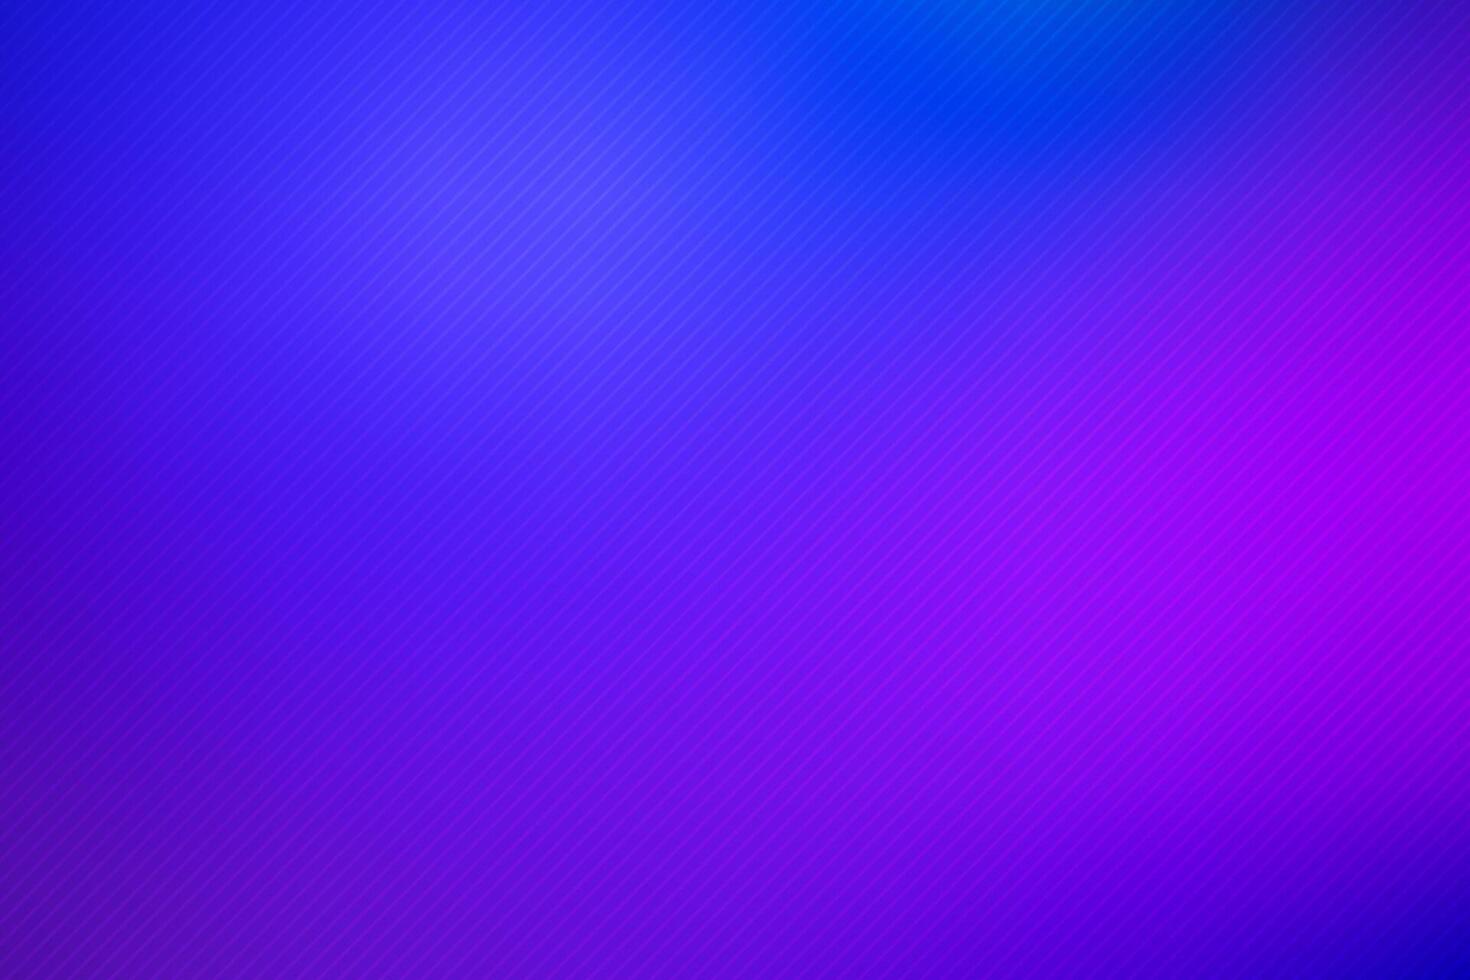 Colorful Artistic Wallpaper with Blurry Abstract Design vector